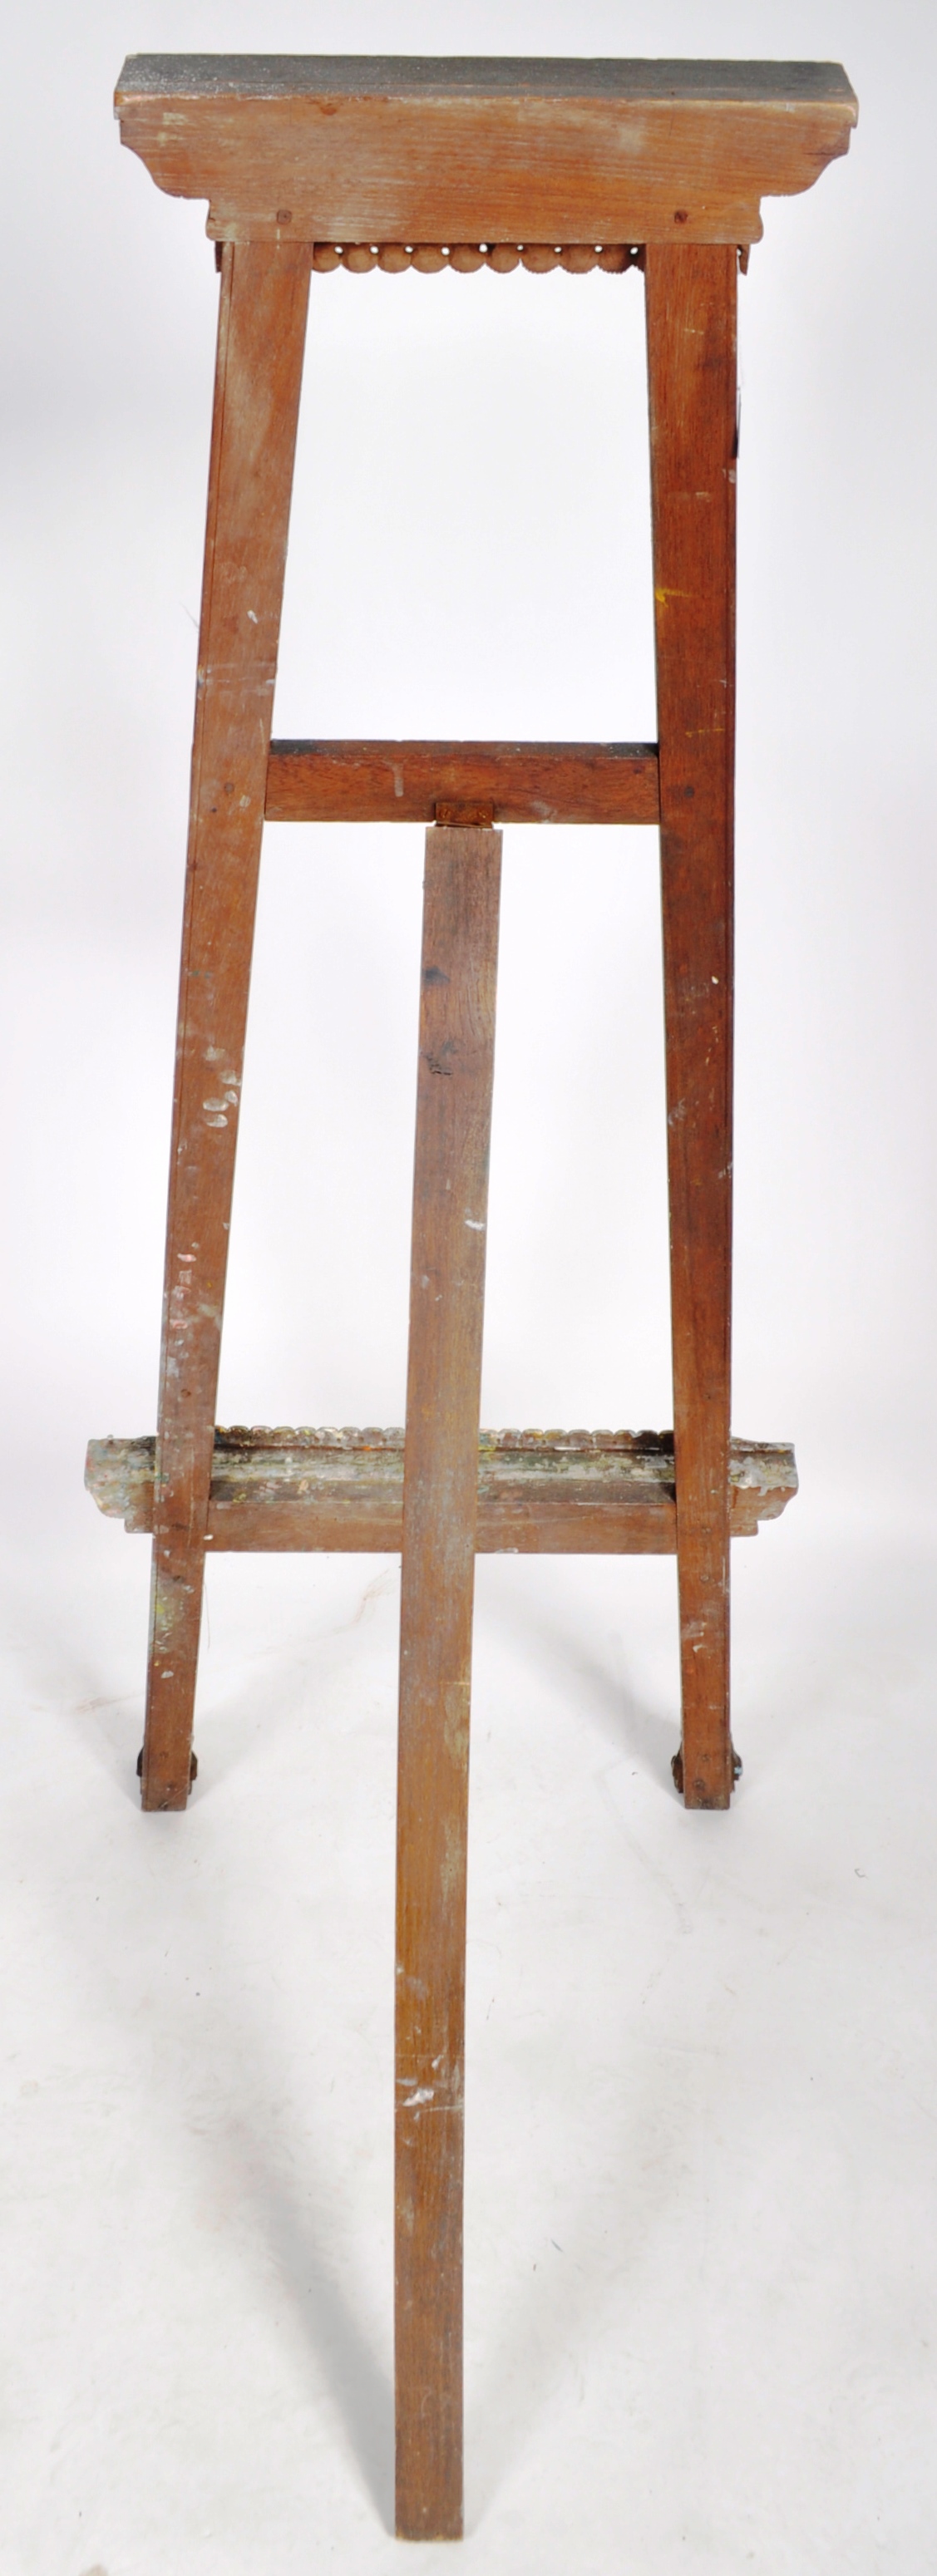 VINTAGE 20TH CENTURY ORIENTAL CARVED WOOD EASEL STAND - Image 12 of 13